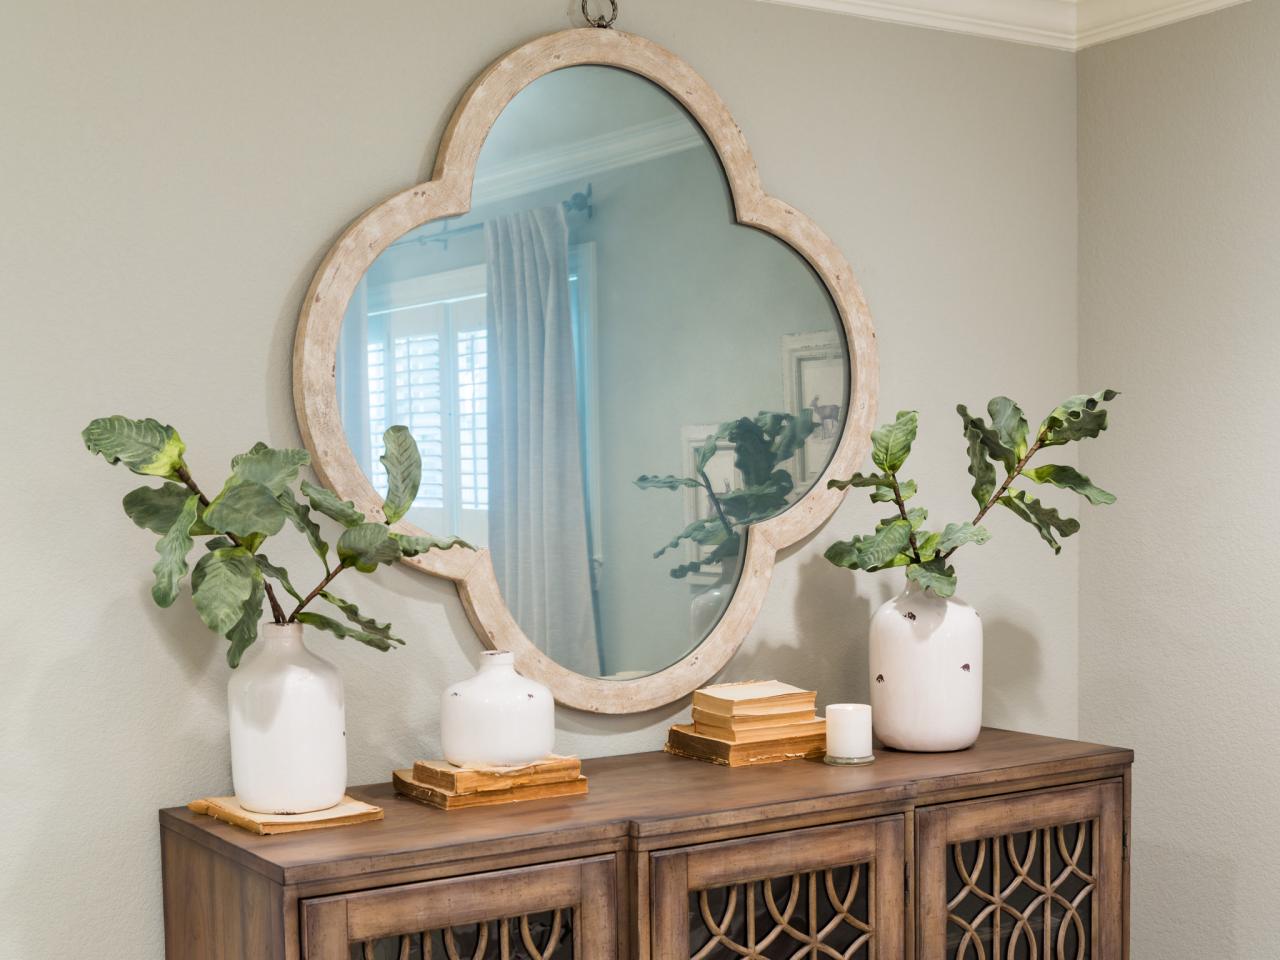 A Wood-Trimmed Mirror